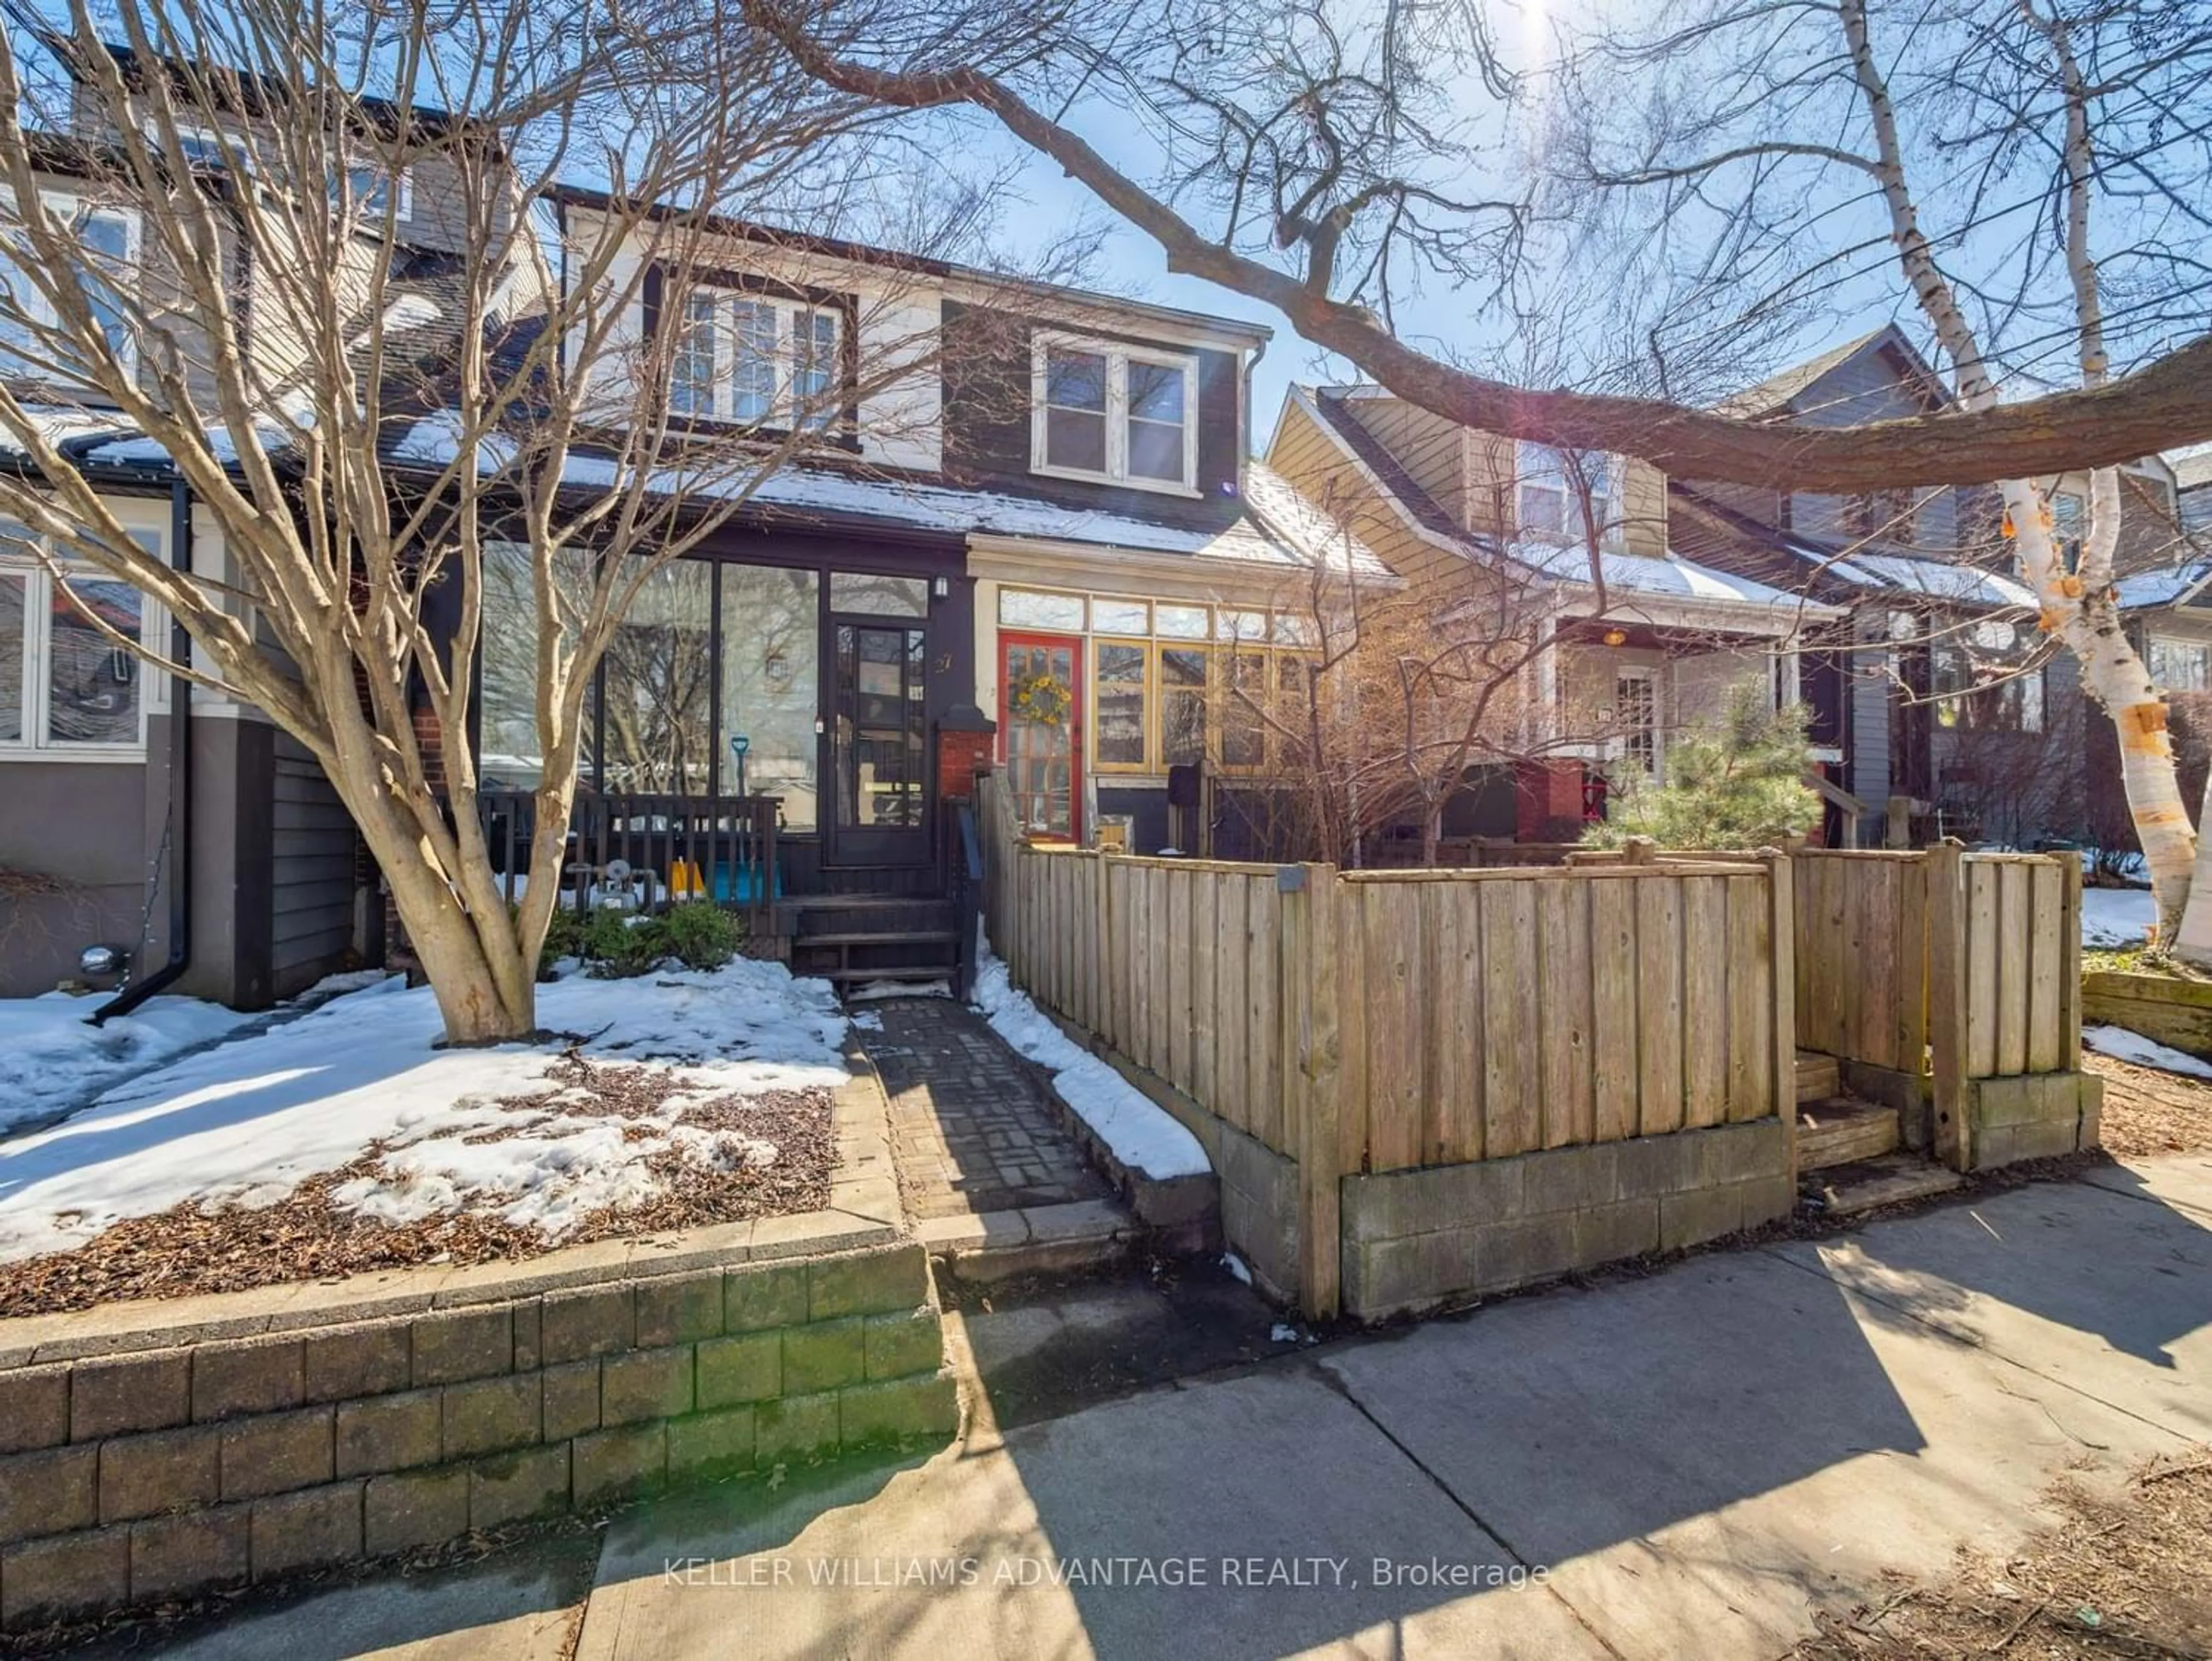 Home with unknown exterior material for 25 Copeland Ave, Toronto Ontario M4C 1A9